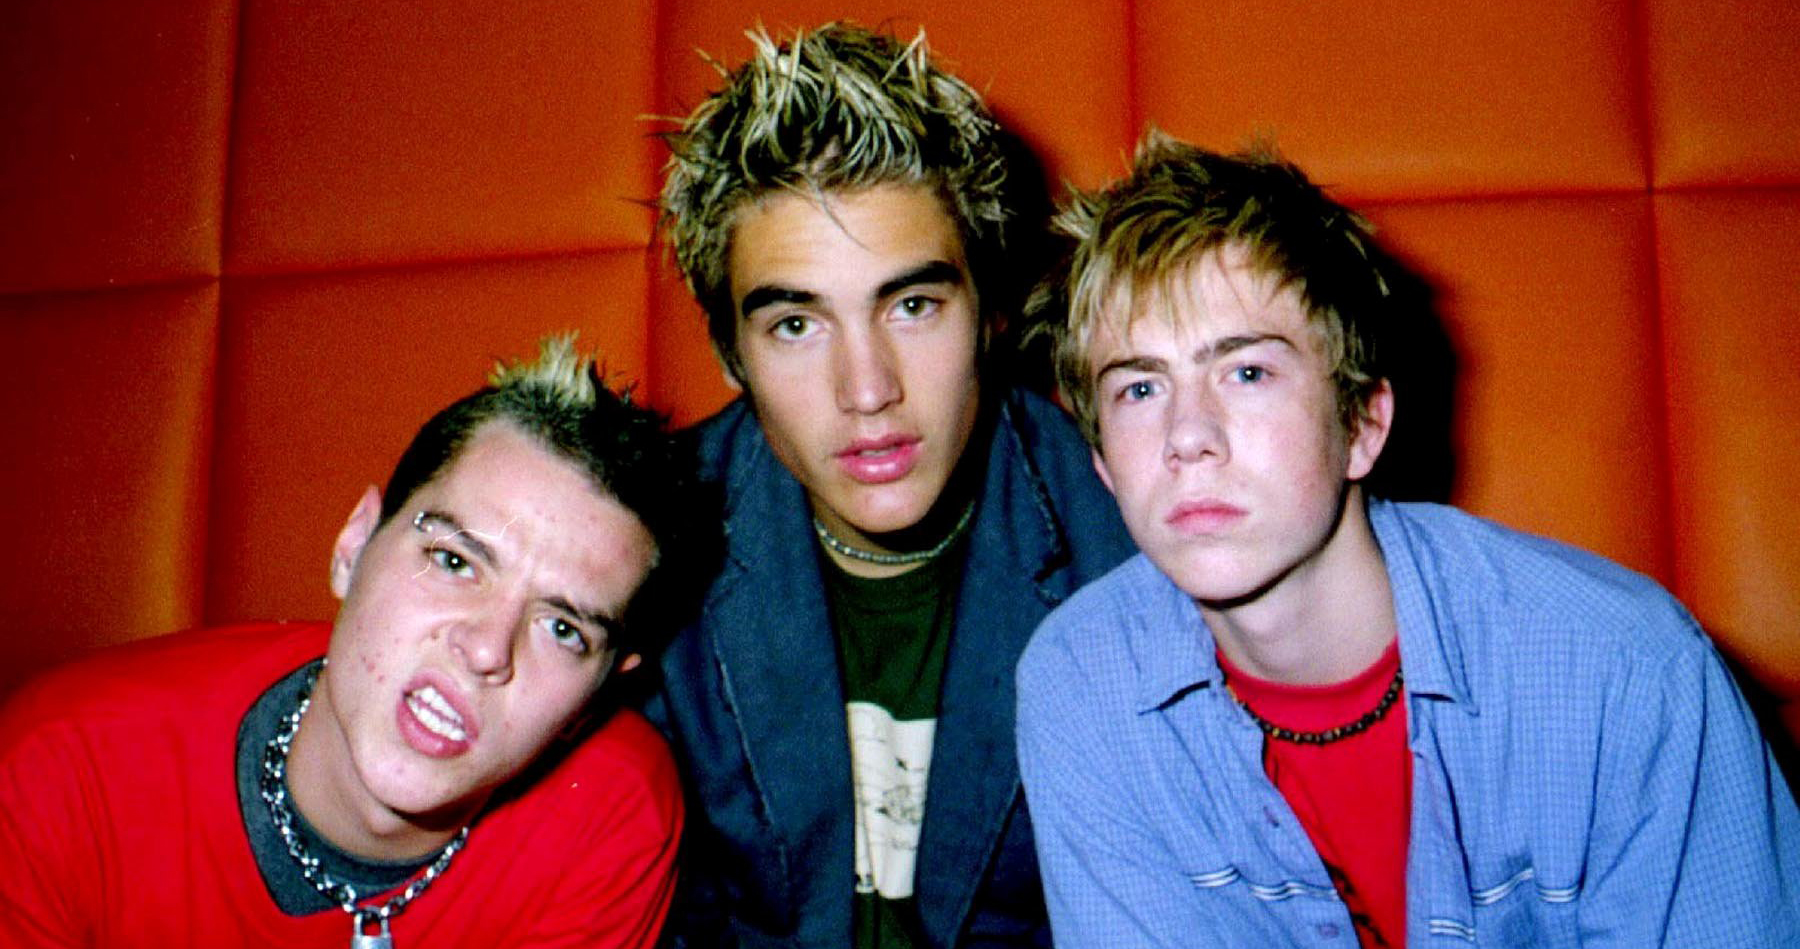 Busted tease huge 20th anniversary plans